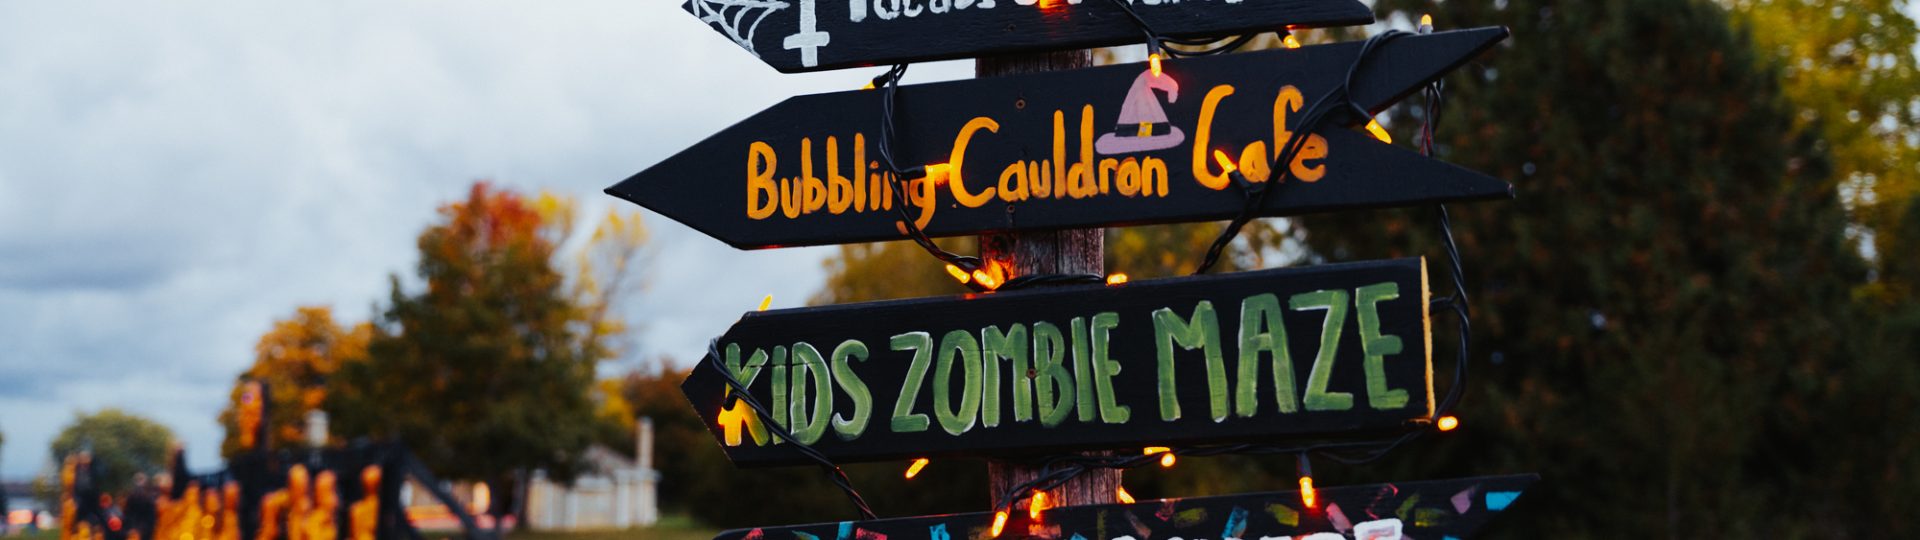 Some directional signage at pumpkinferno with pumpkin displays in the background